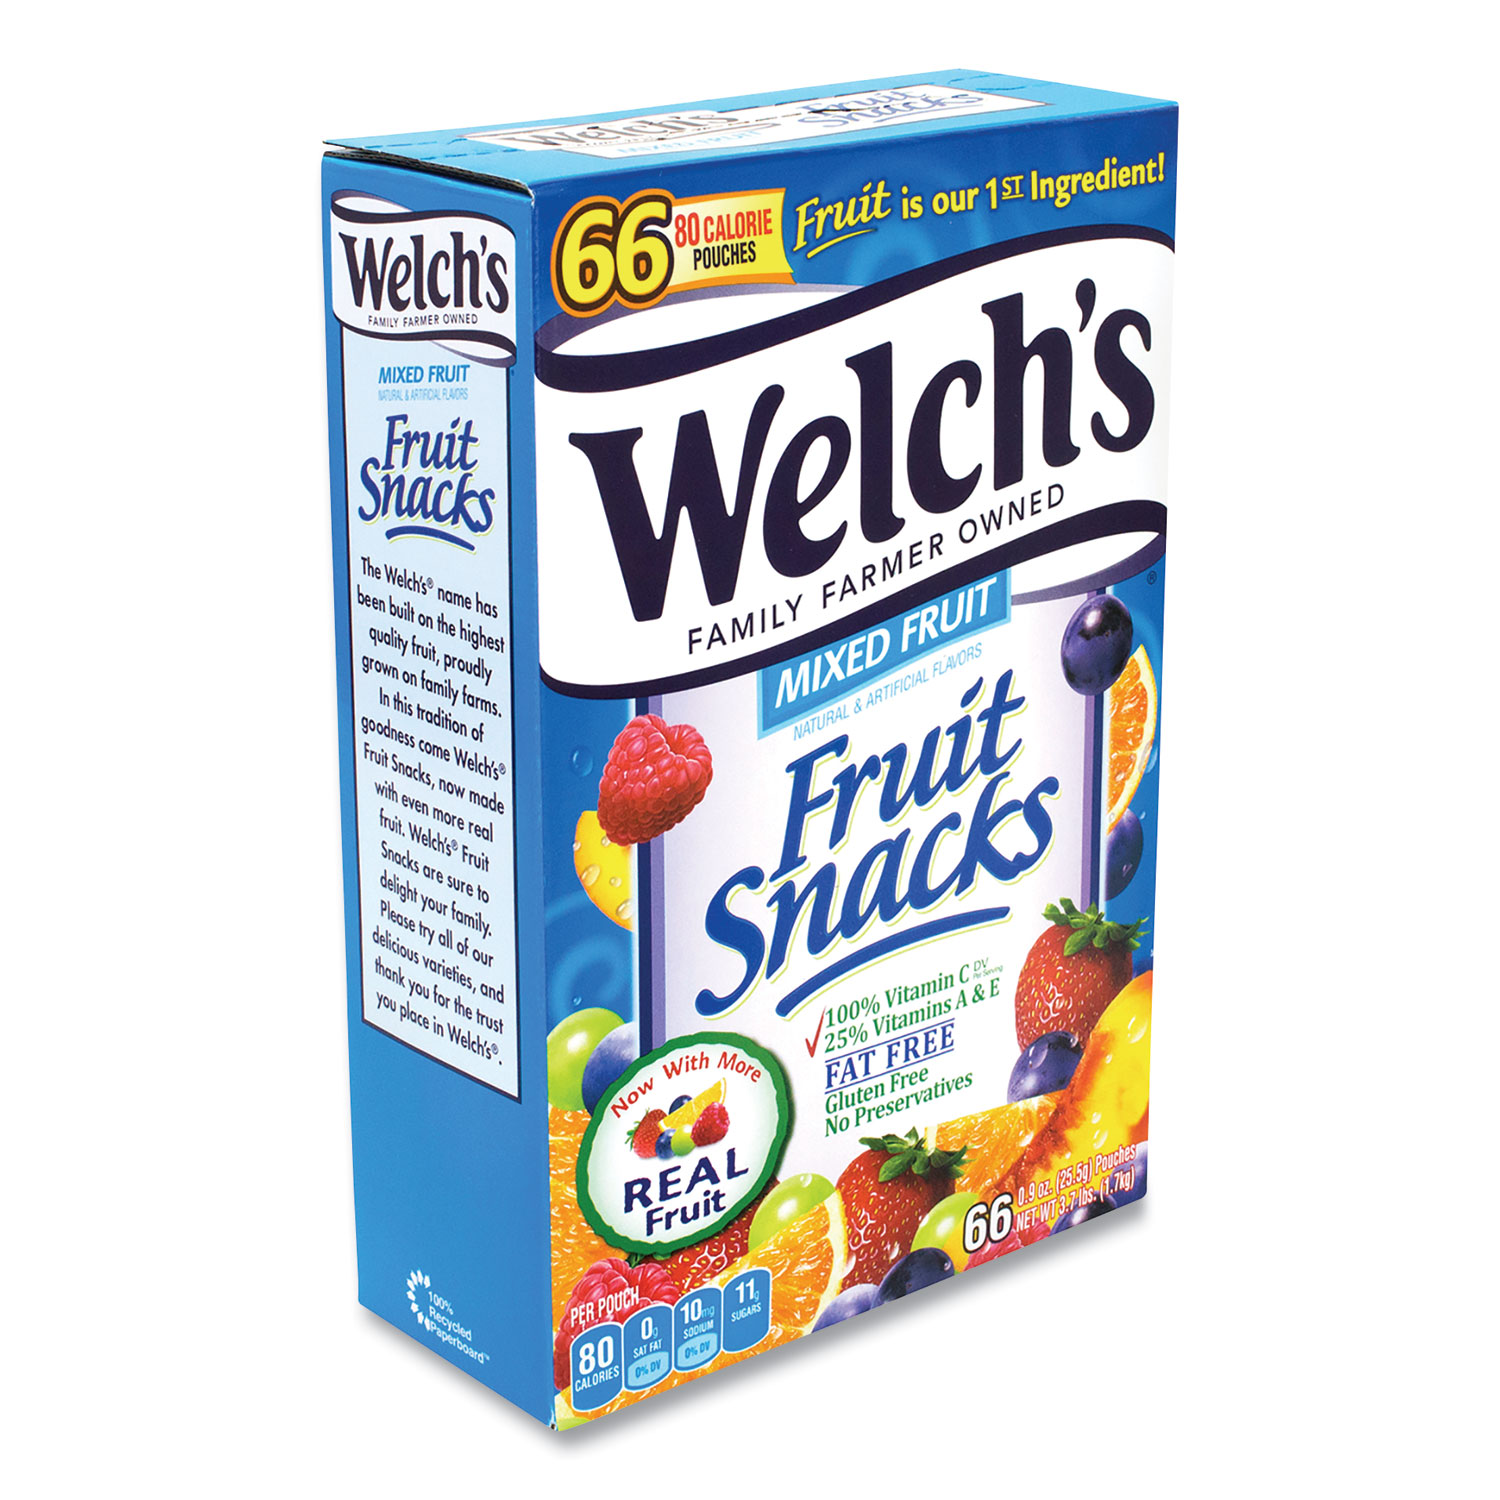  Welch's 20900320 Fruit Snacks, Mixed Fruit, 0.9 oz Pouch, 66 Pouches/Box, Free Delivery in 1-4 Business Days (GRR20900320) 